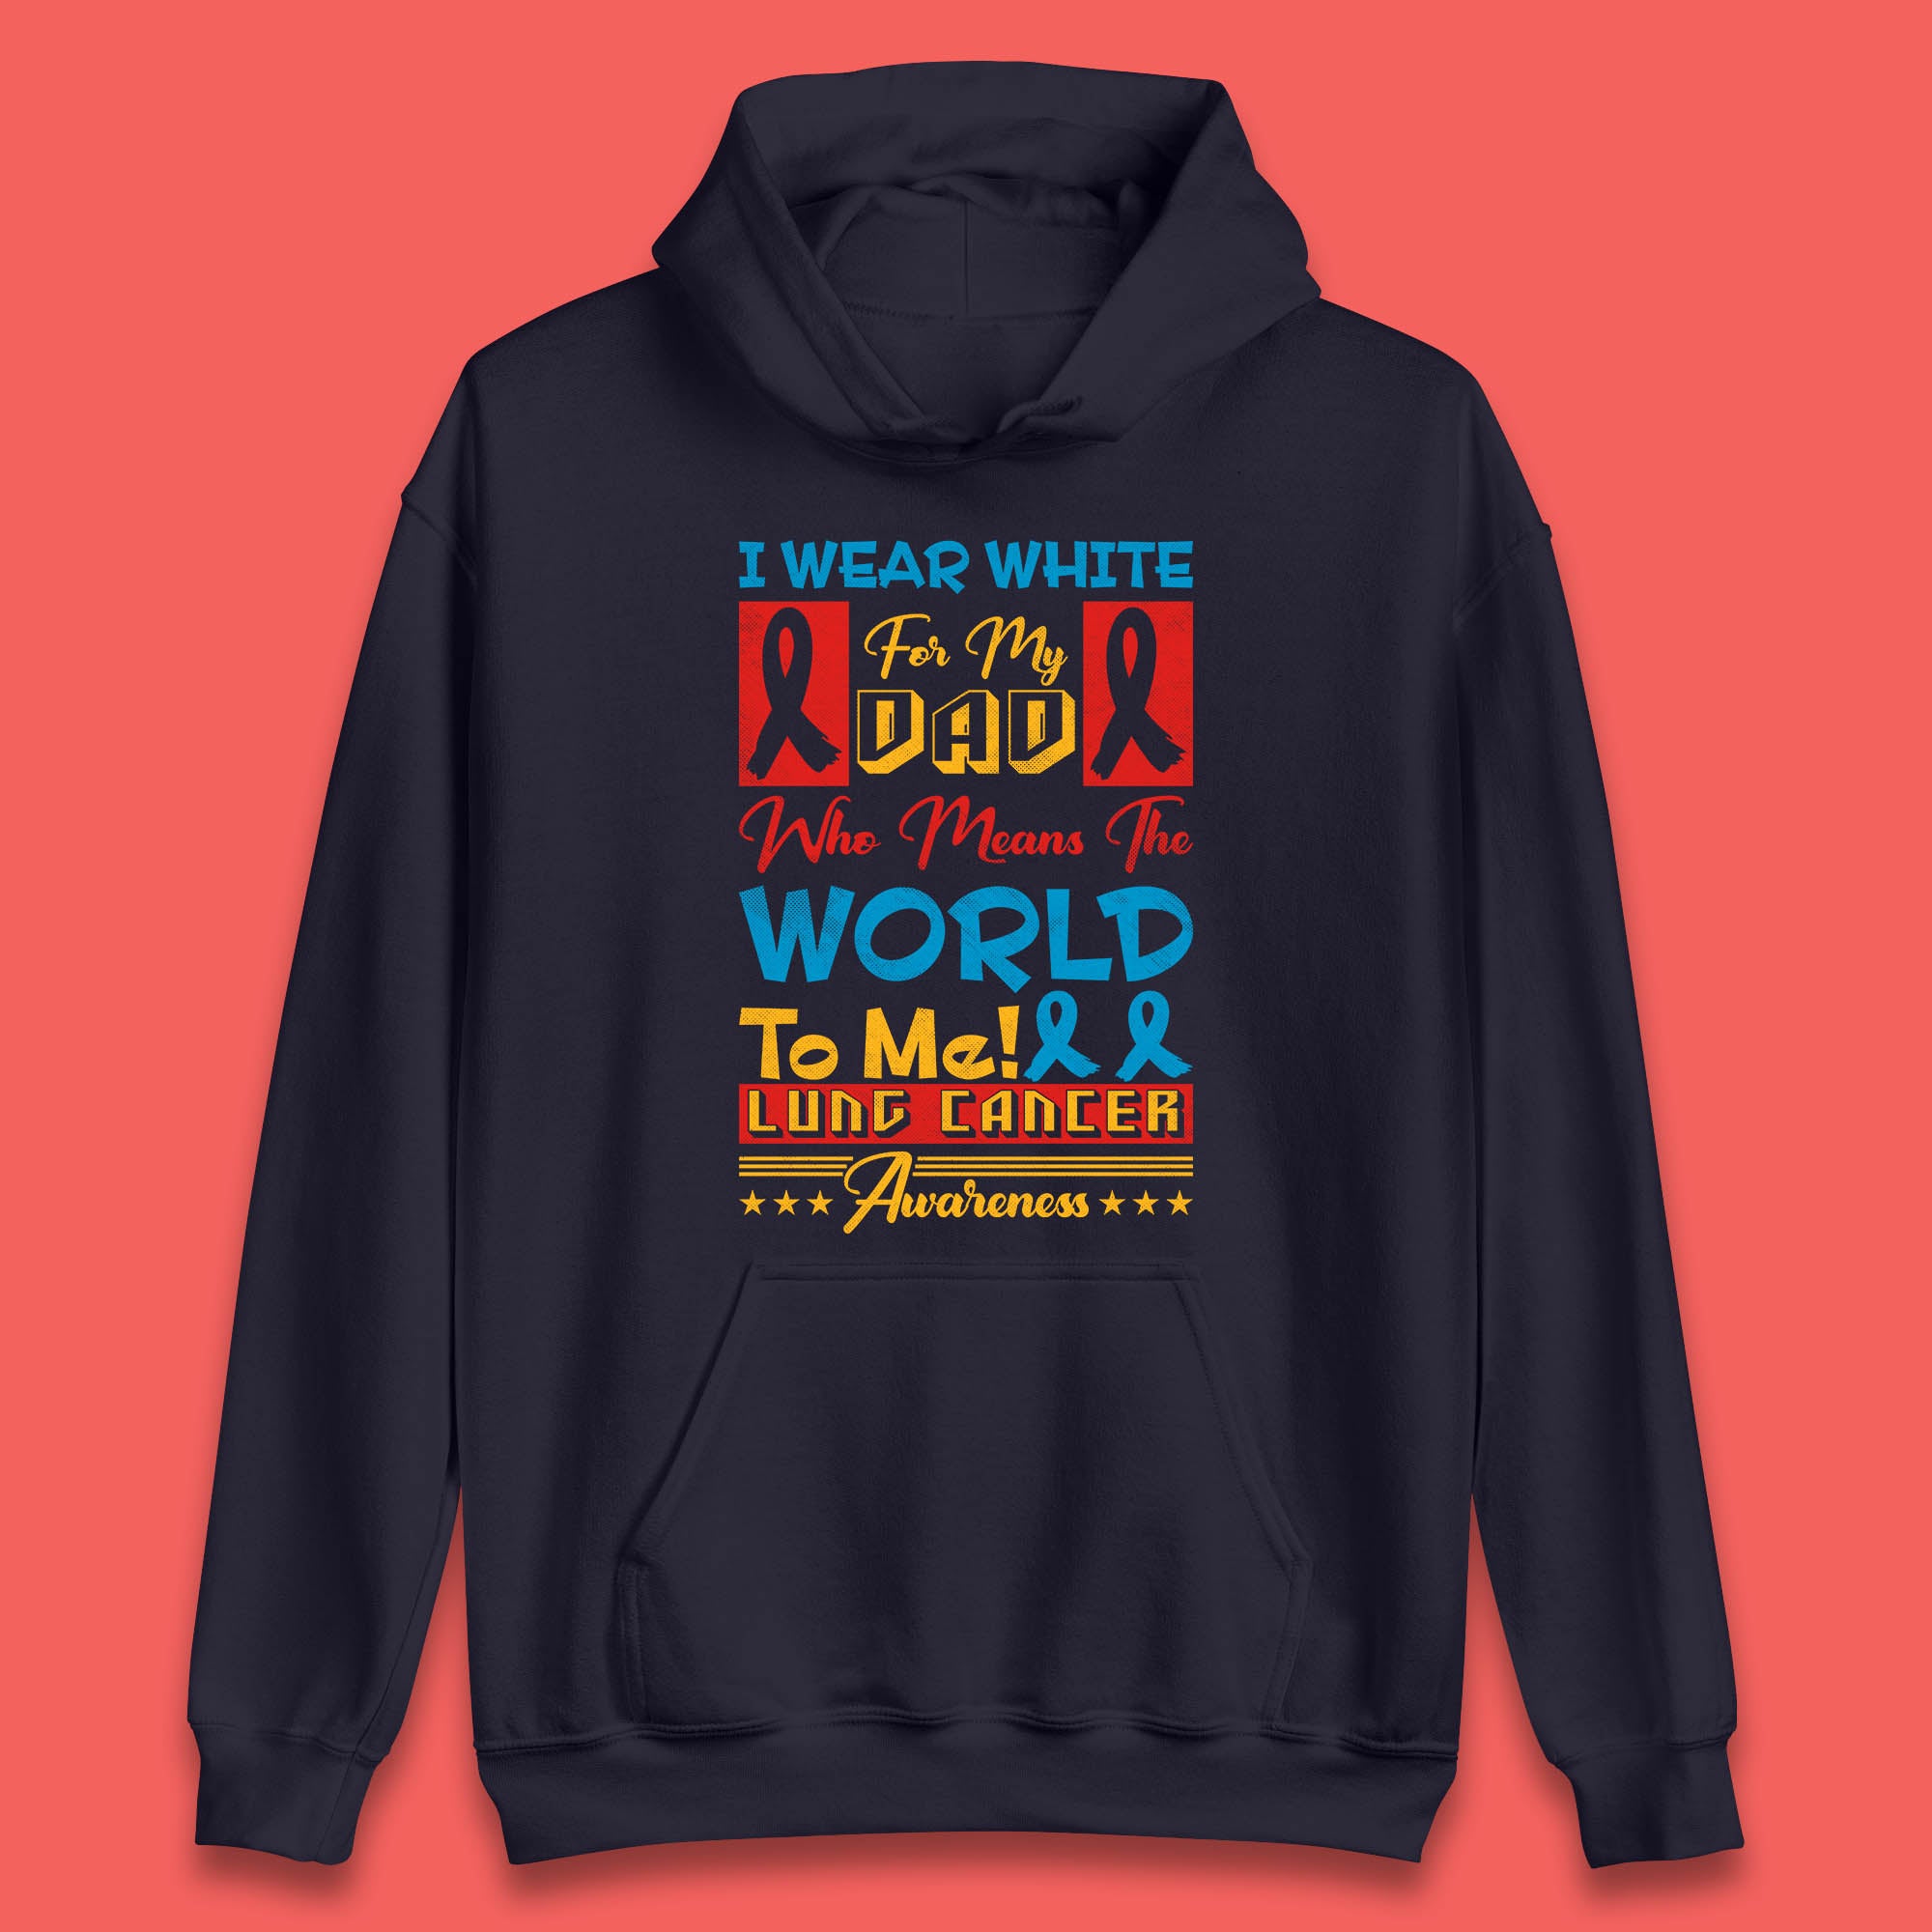 I Wear White For My Dad Who Means The World To Me Lung Cancer Awareness Cancer Fighter Survivor Unisex Hoodie